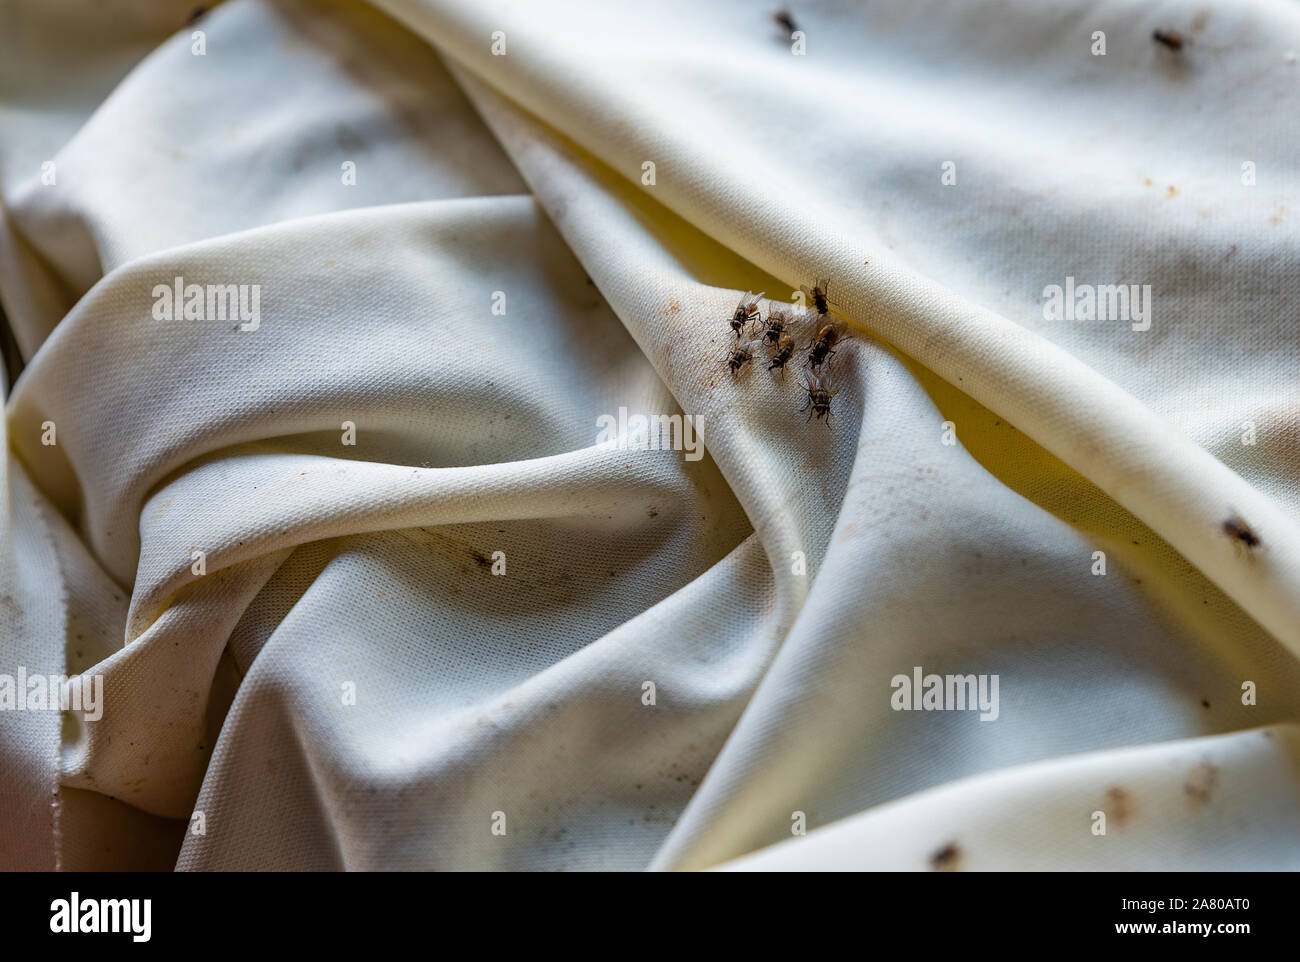 Flies on dirty tablecloth Stock Photo